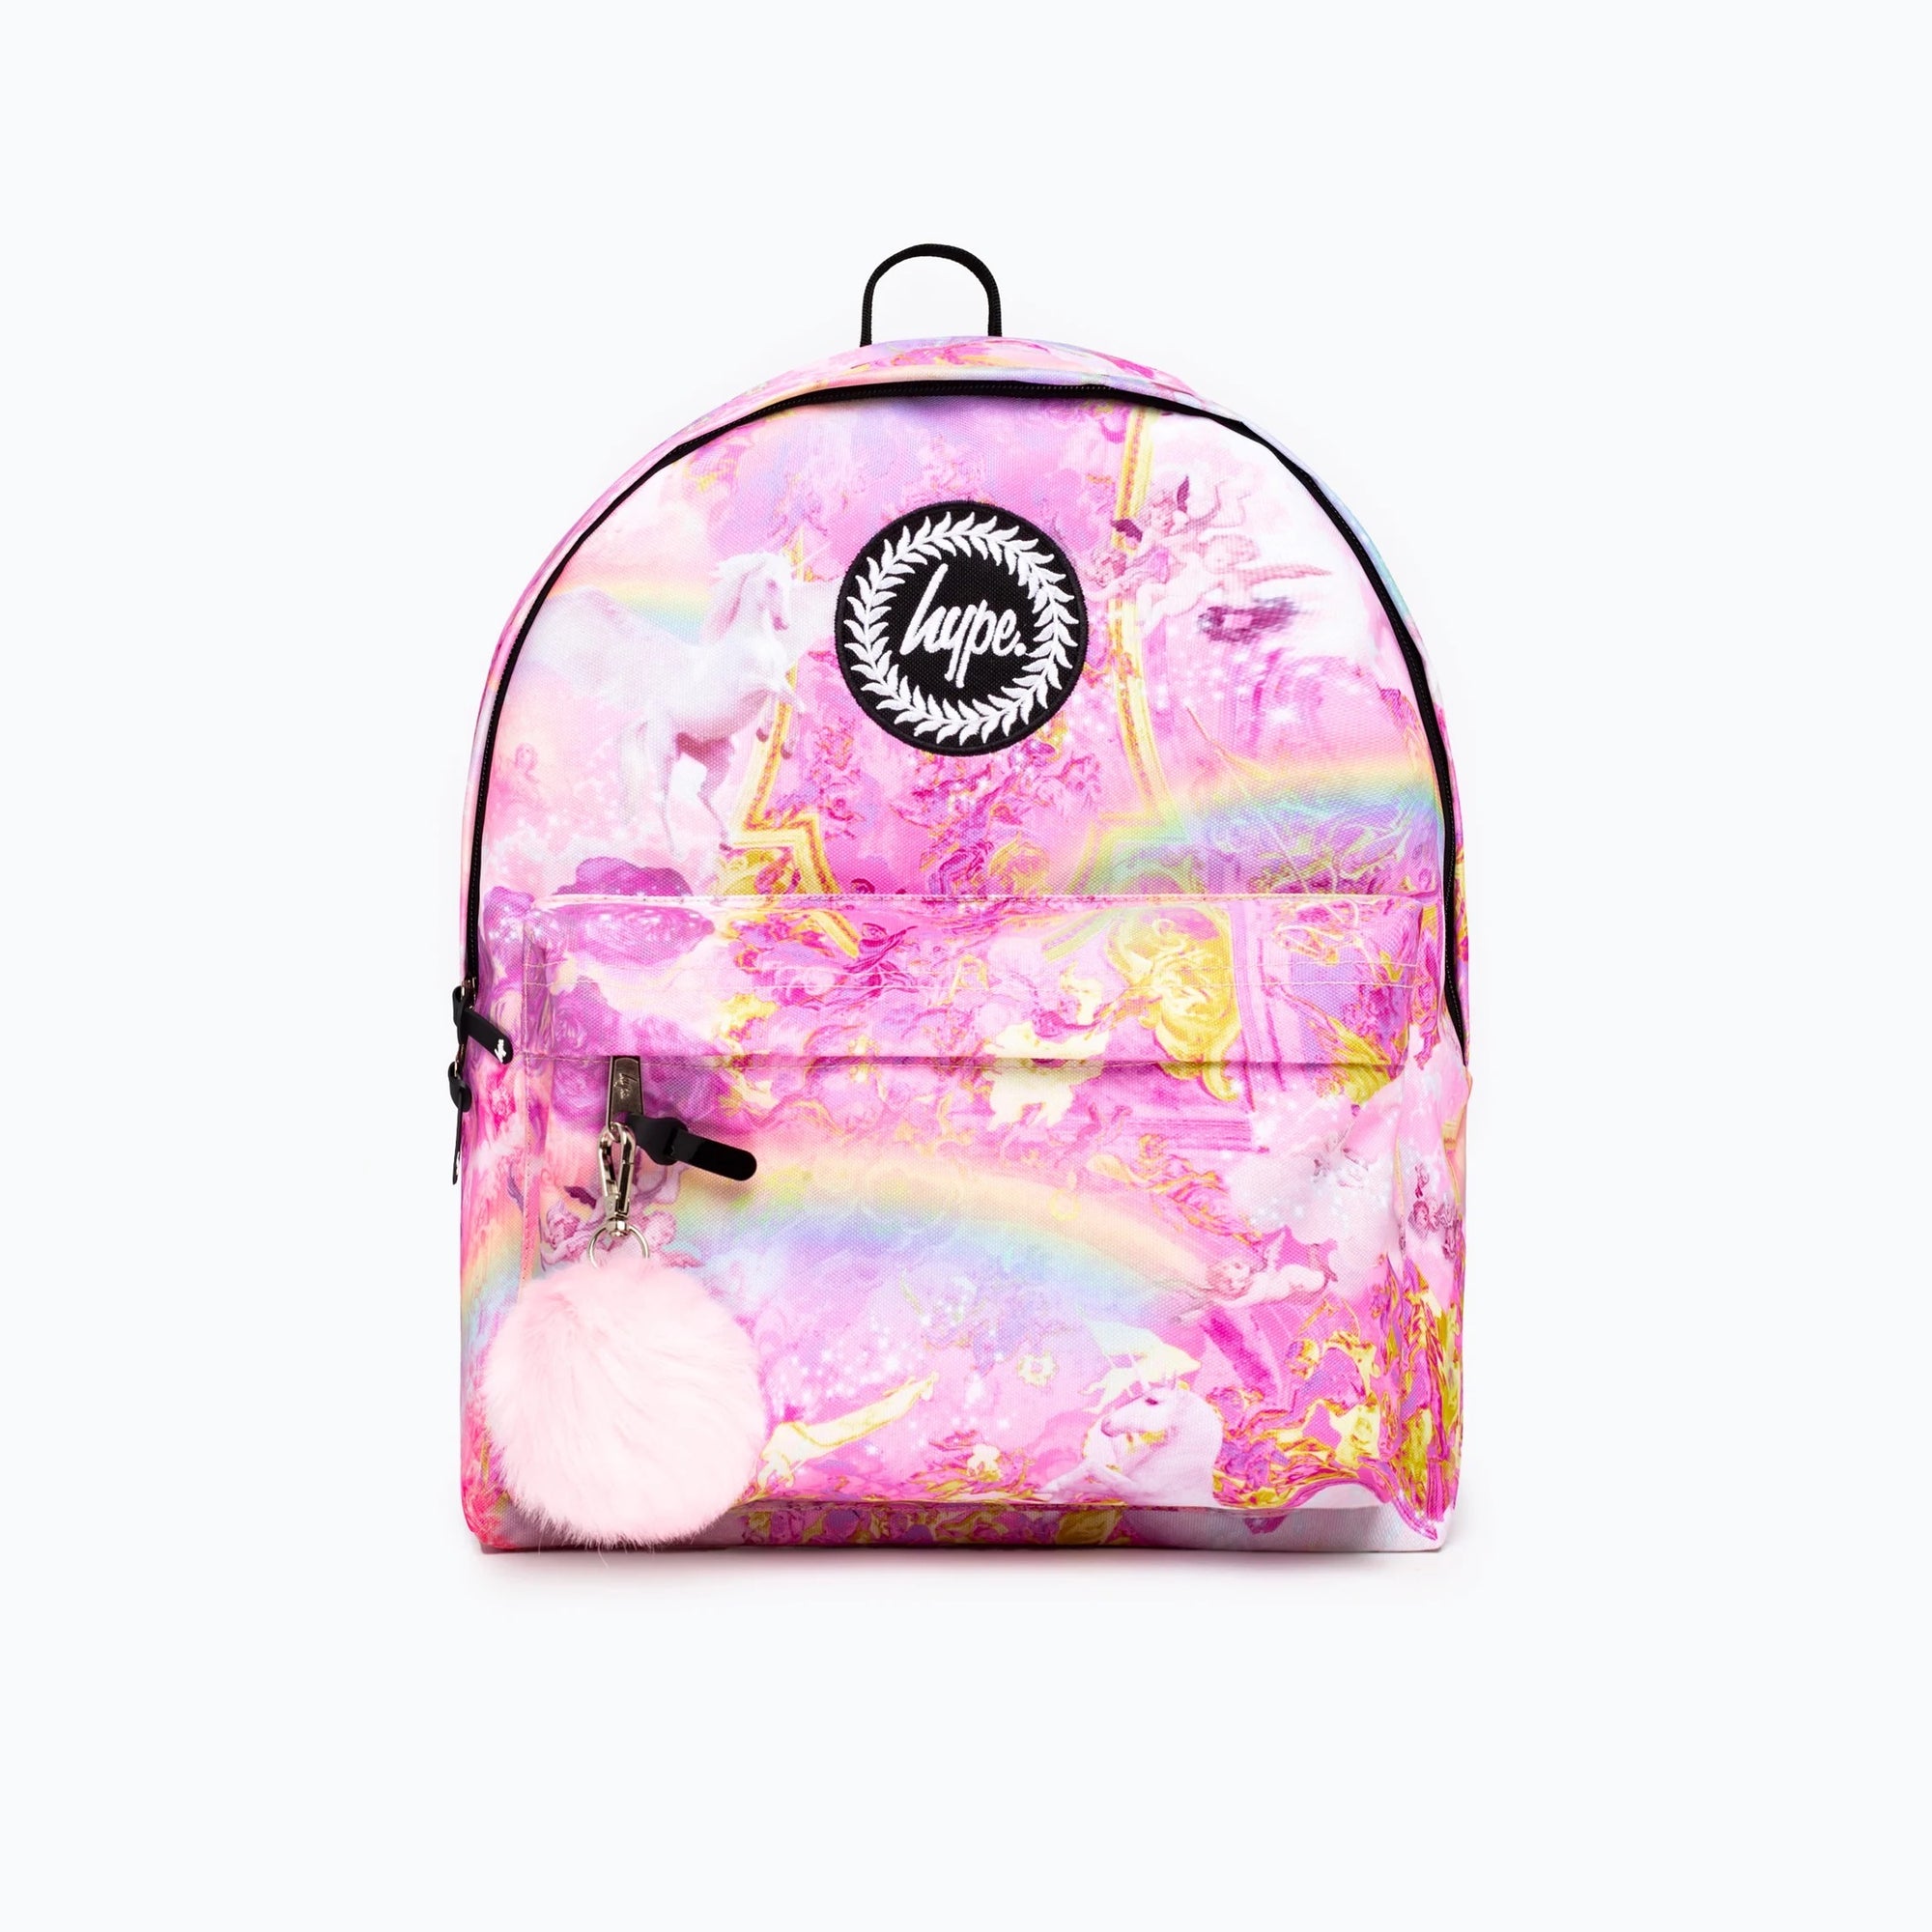 Hype Pink Rainbow Unicorn Backpack Xucb-015 Accessories ONE SIZE / Pink